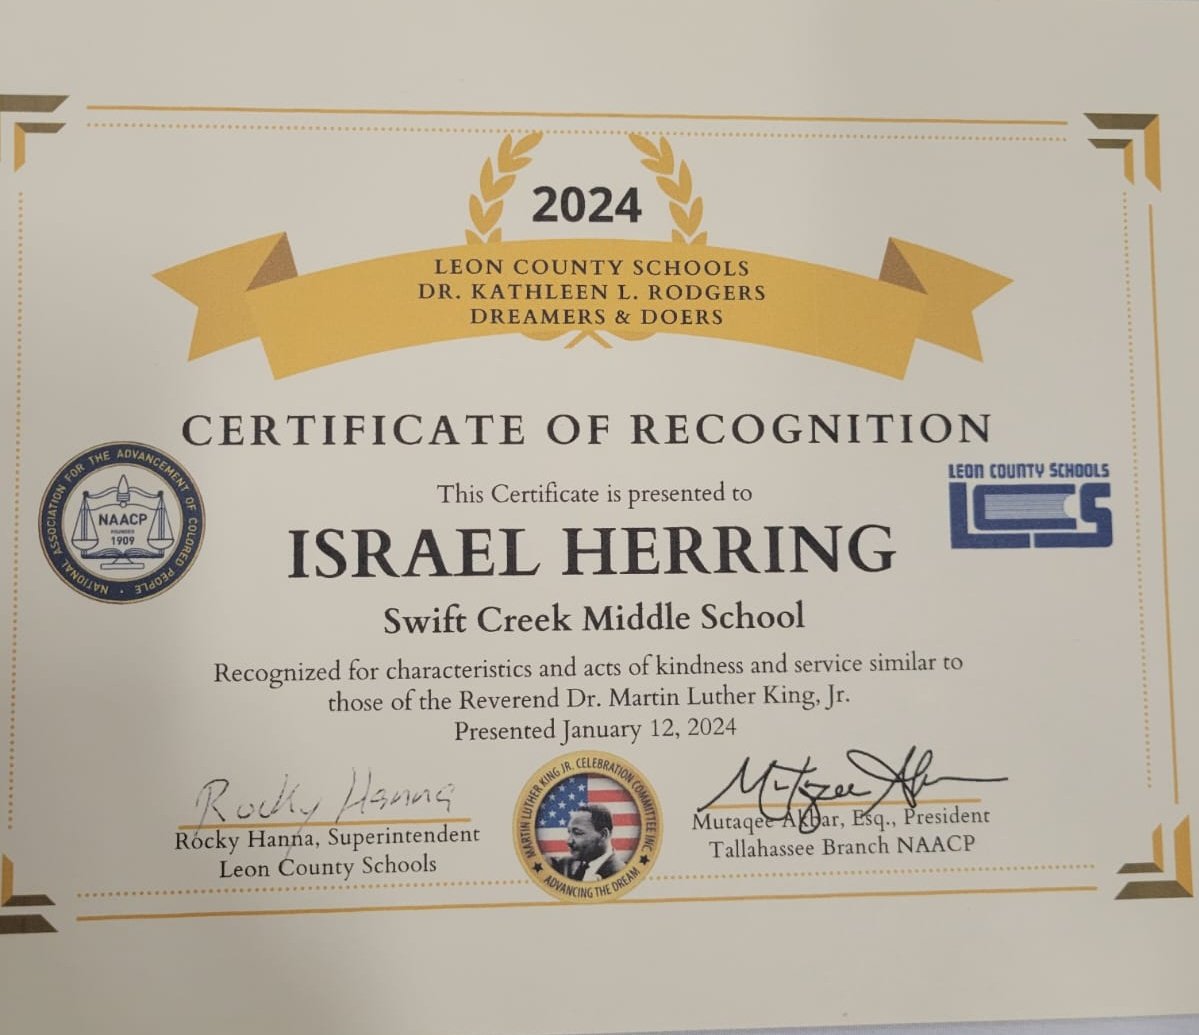 Congratulations to Israel, my second born, for being one of only two eighth graders honored with the Dr. Martin Luther King Jr. Dreamers and Doers Award. #SecondBorn #Izzy #MyGuys #HerringGang